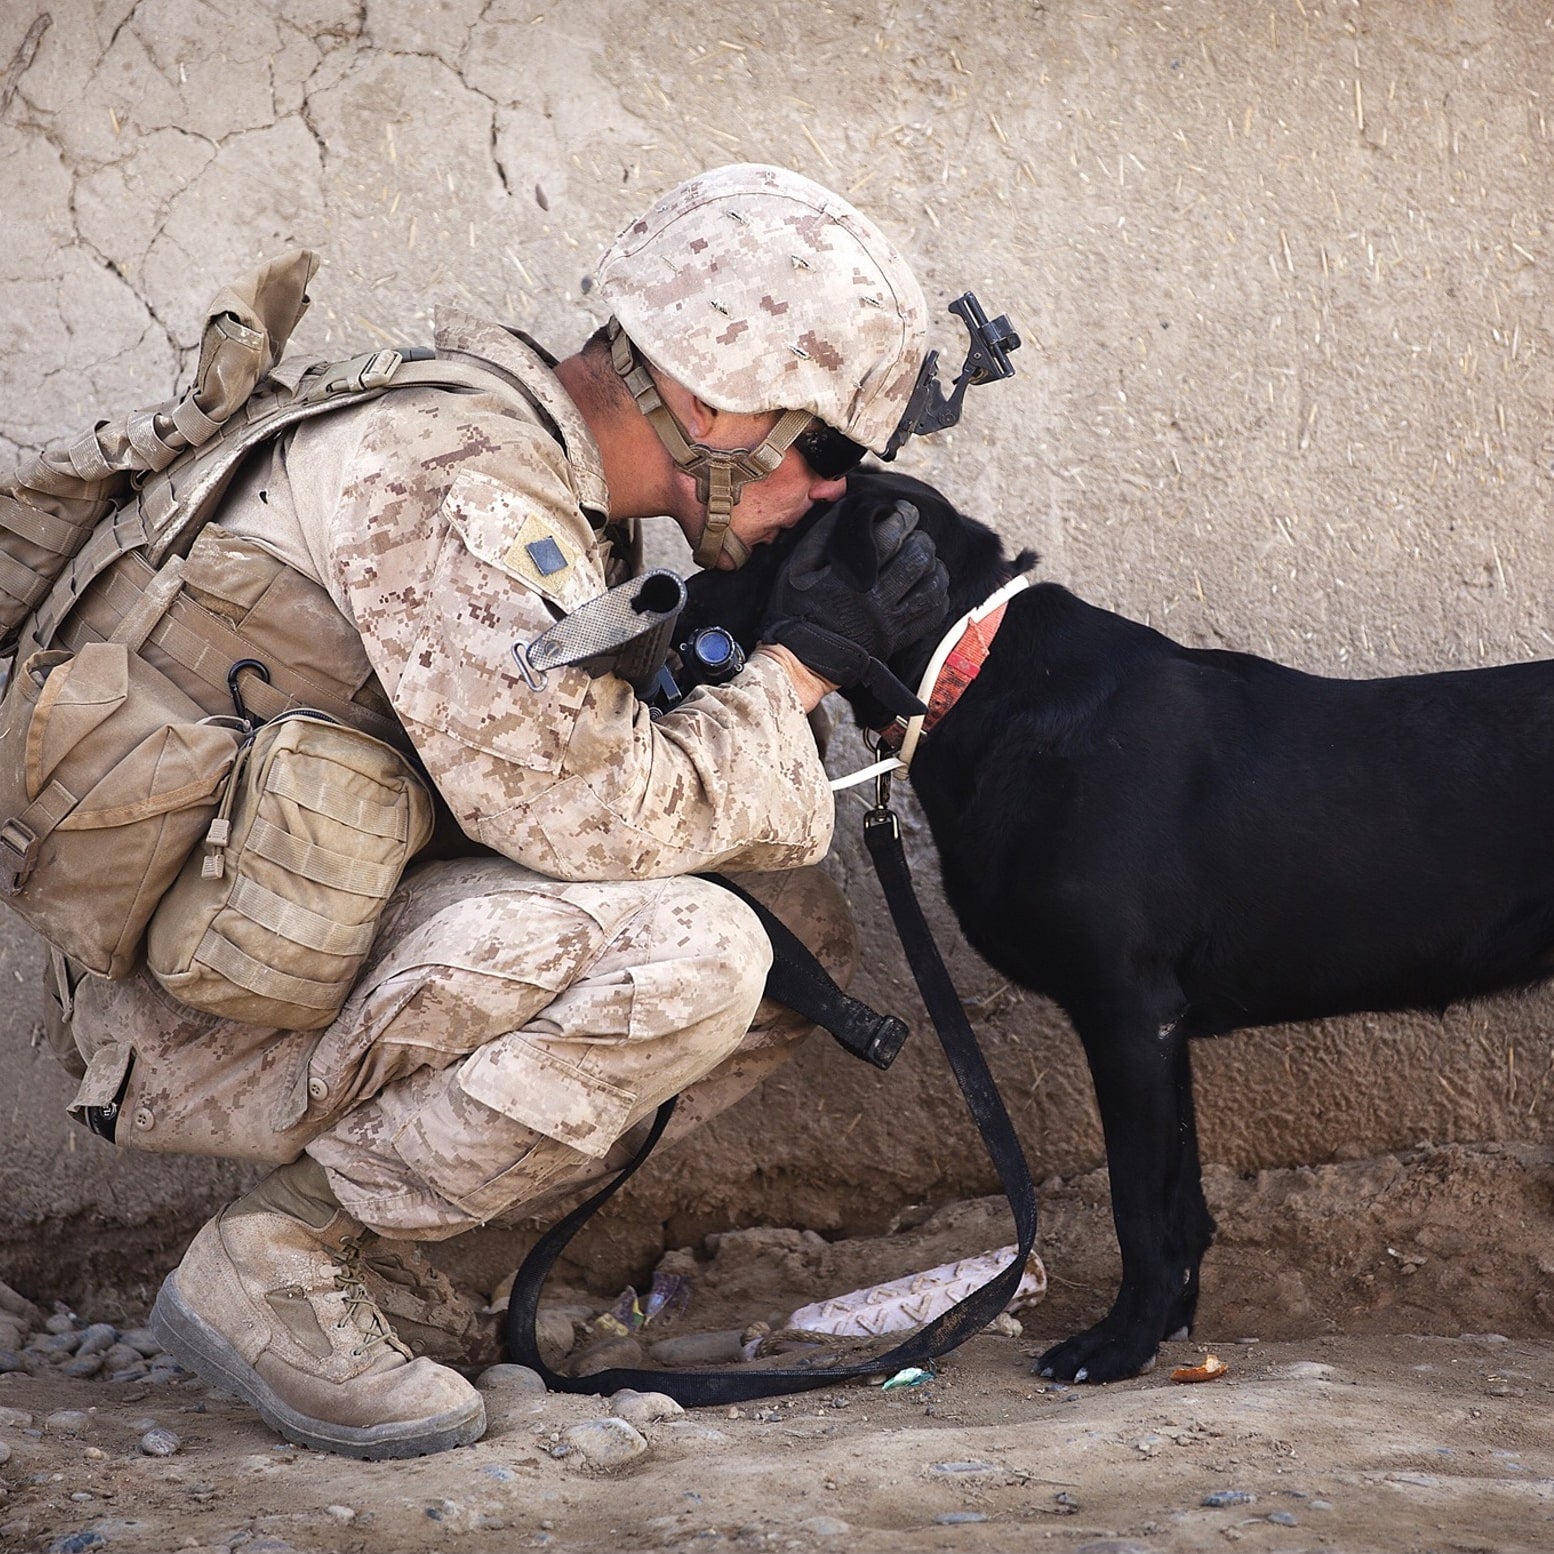 A service dog with its soldier.